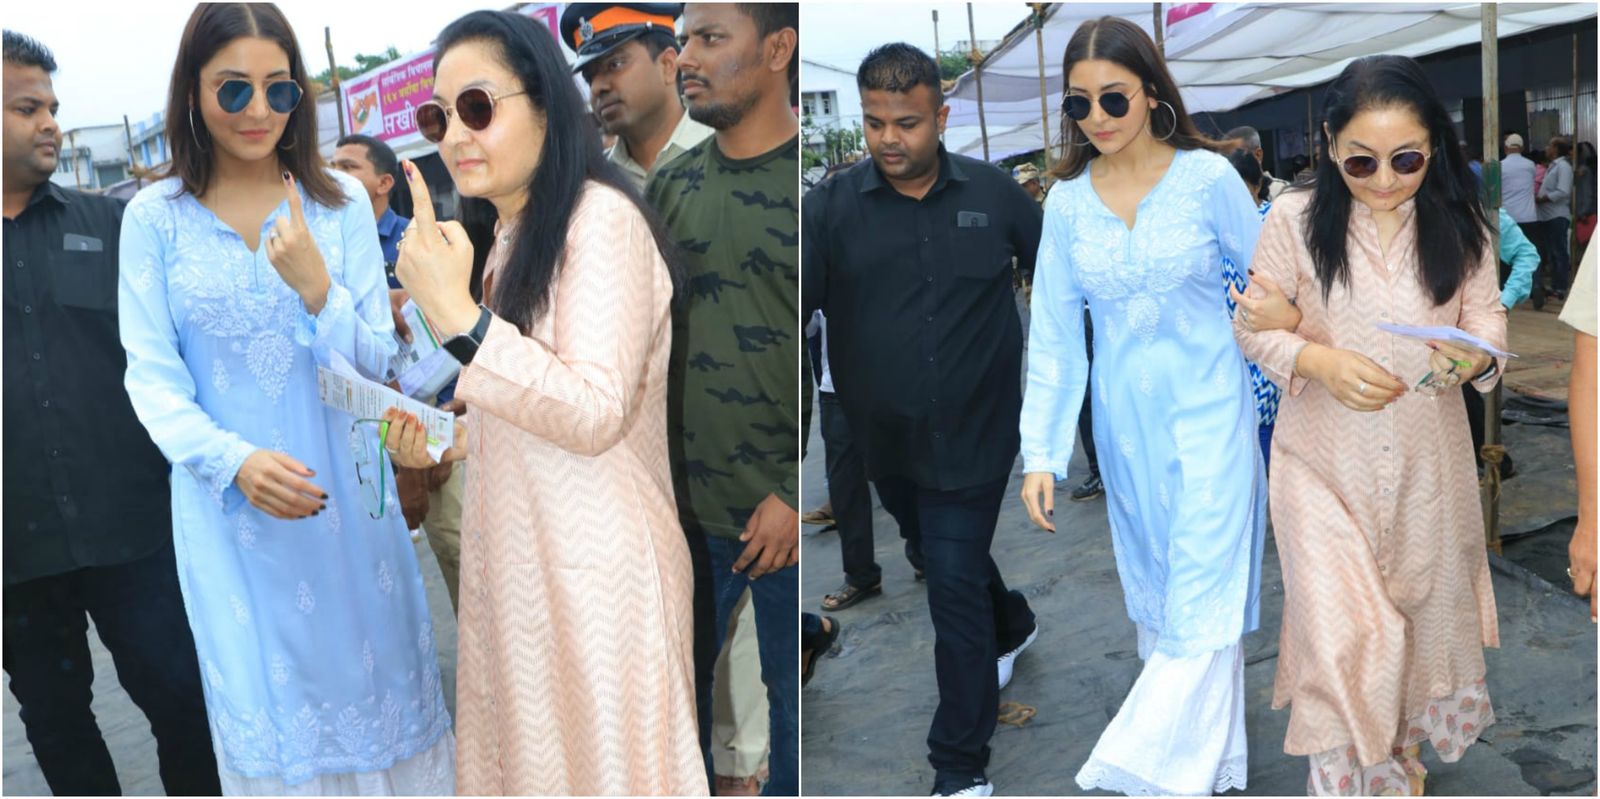 Anushka Sharma Nails The Casual Etnnic Look And You Should Be Taking Notes